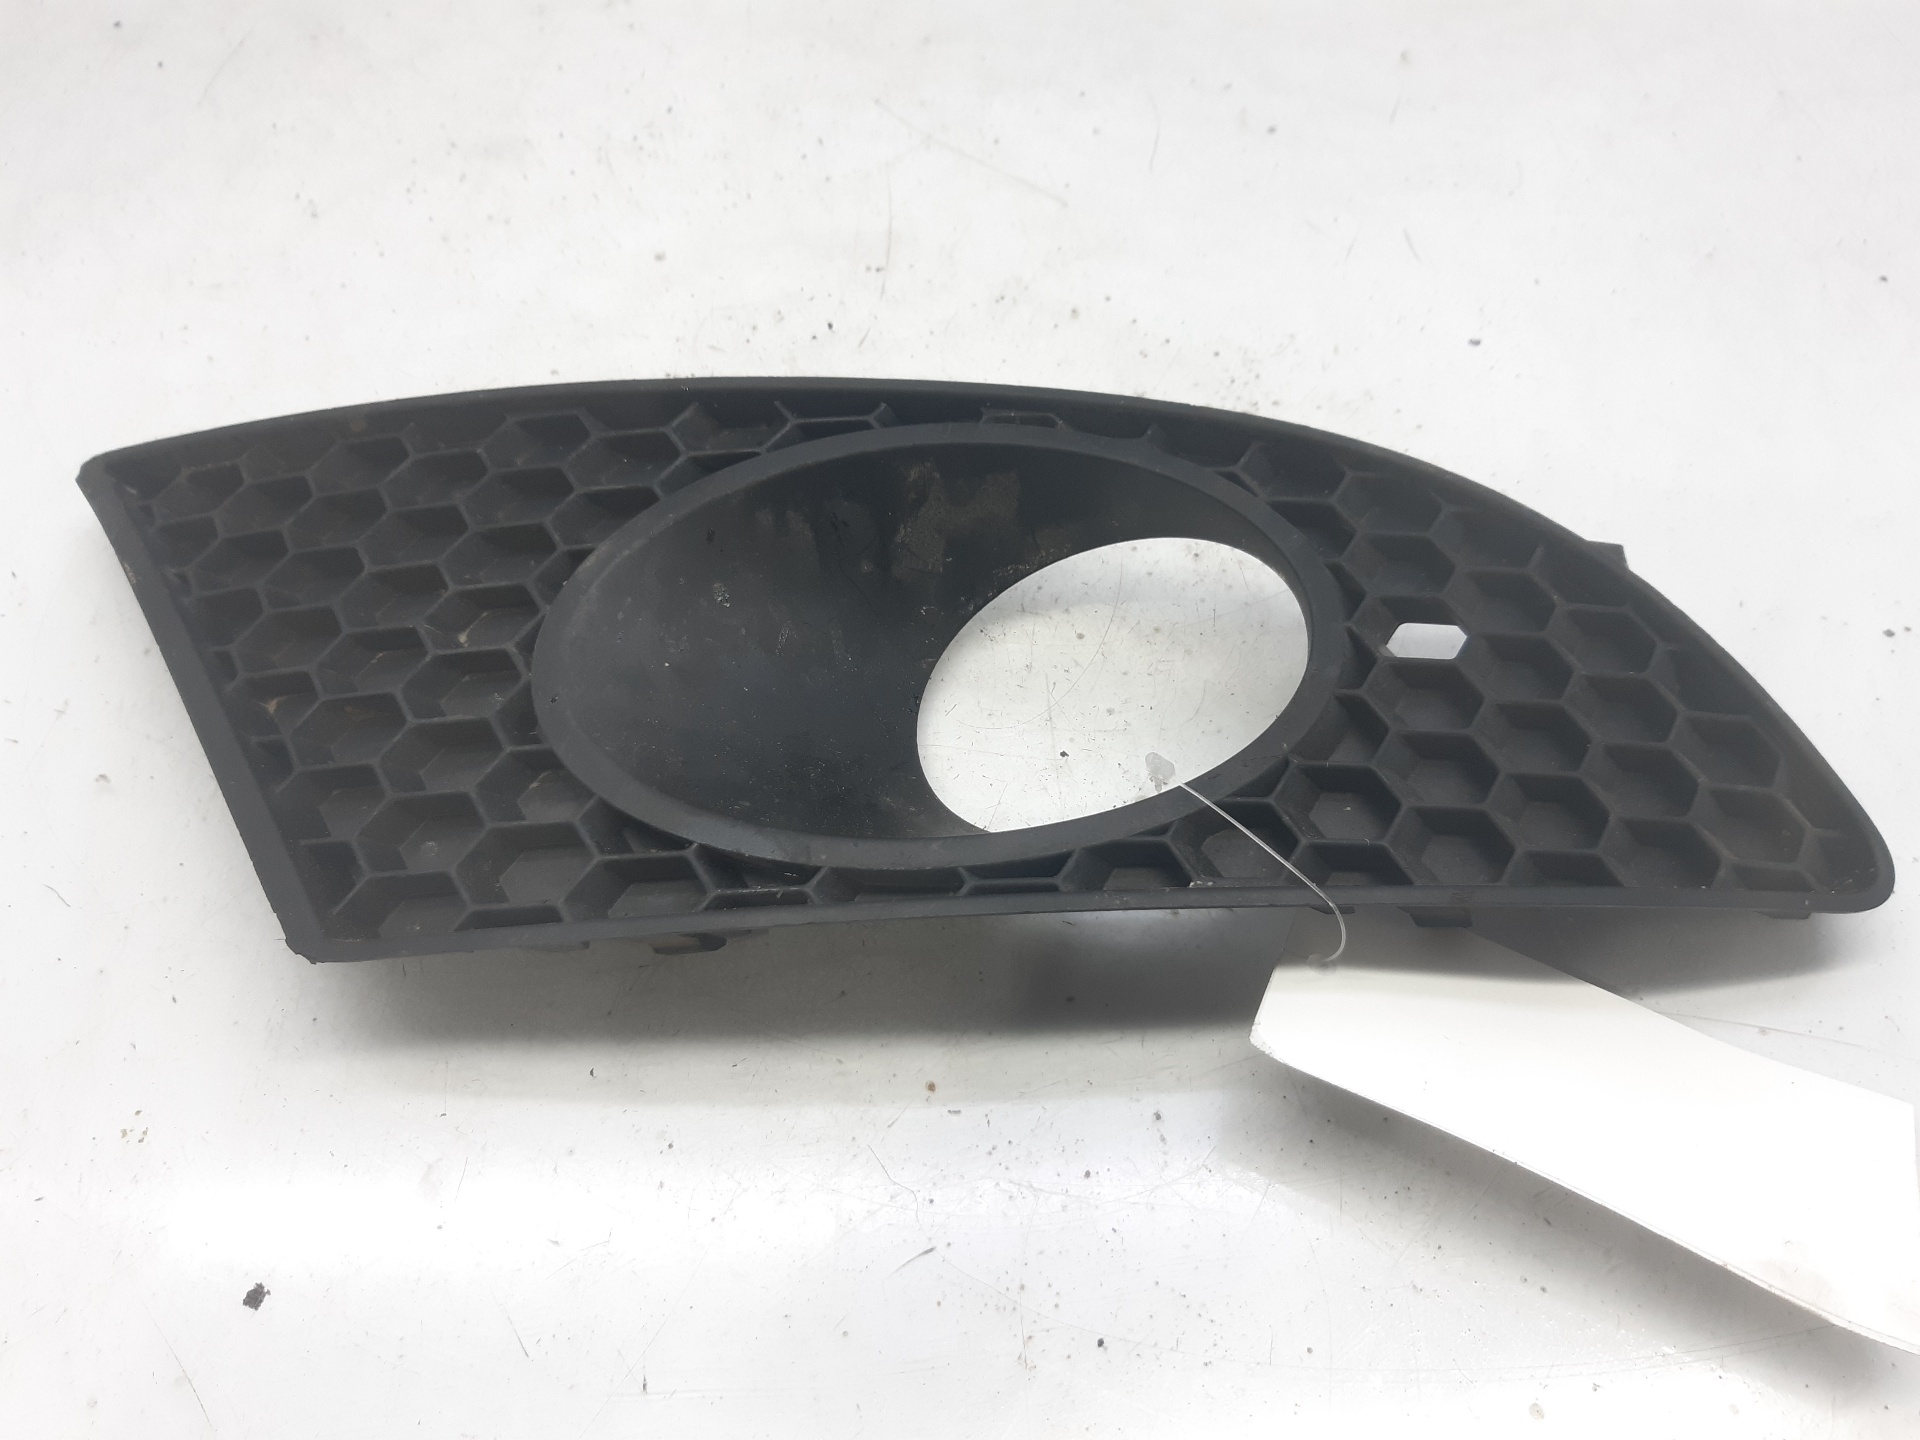 SEAT Leon 2 generation (2005-2012) Other part 1P0853666A 24932282